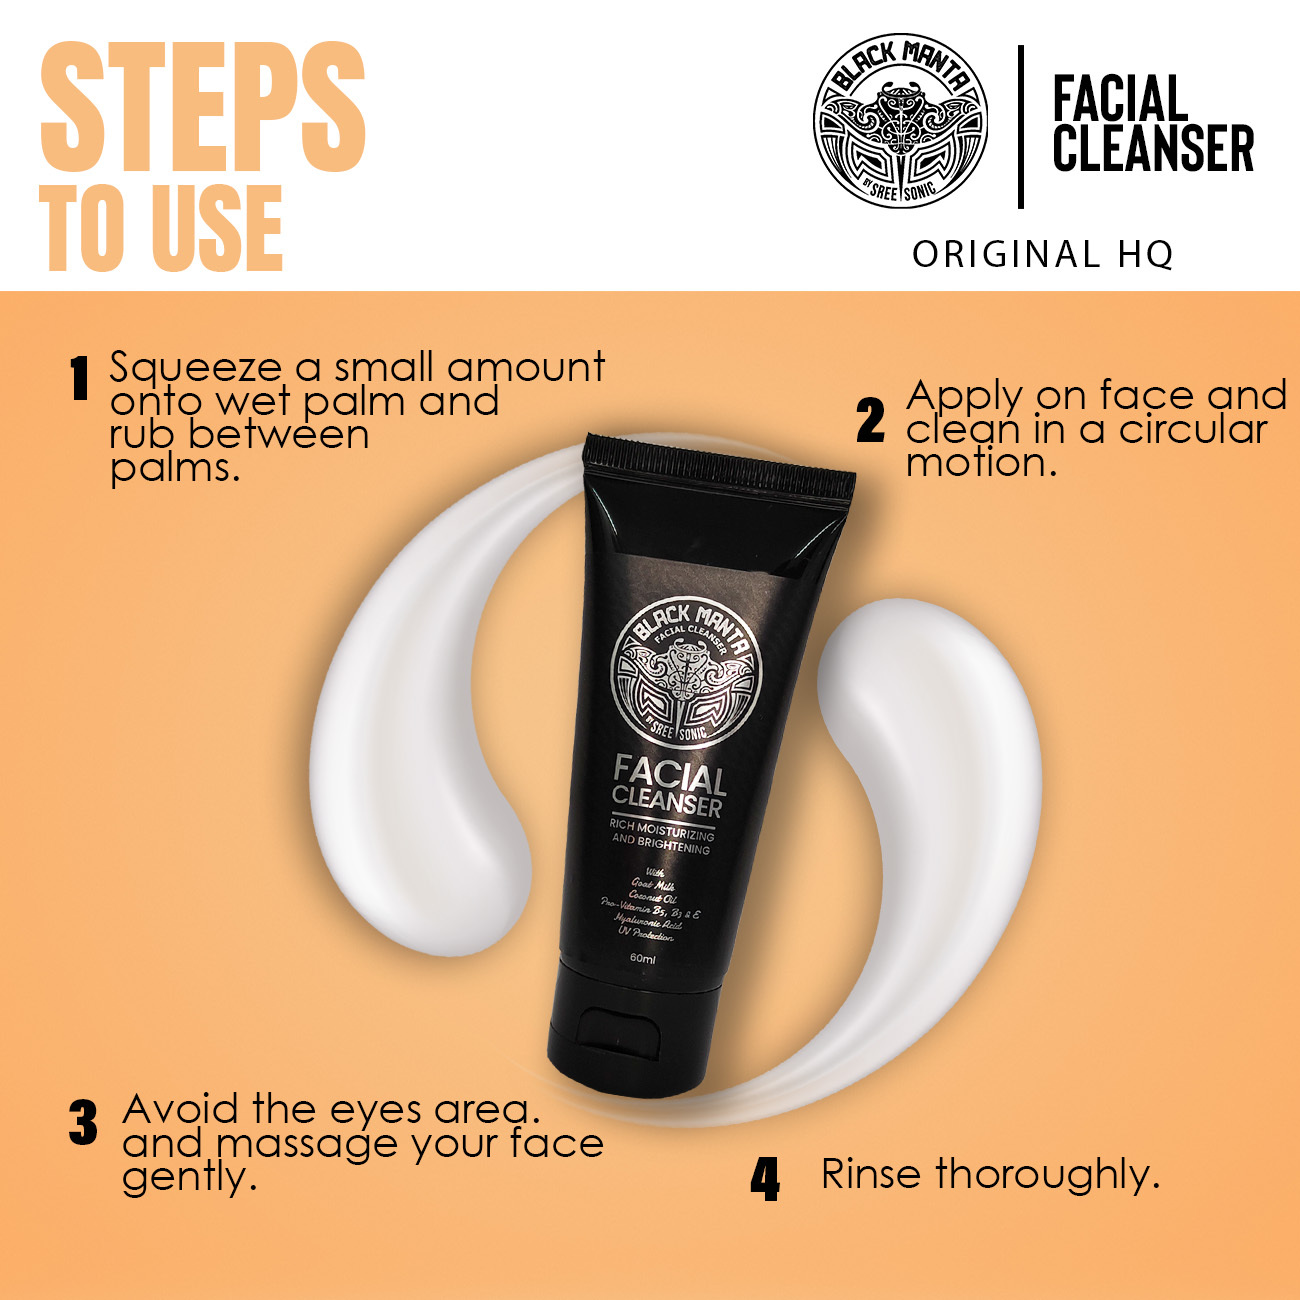 CLEANSER- STEPS TO USE